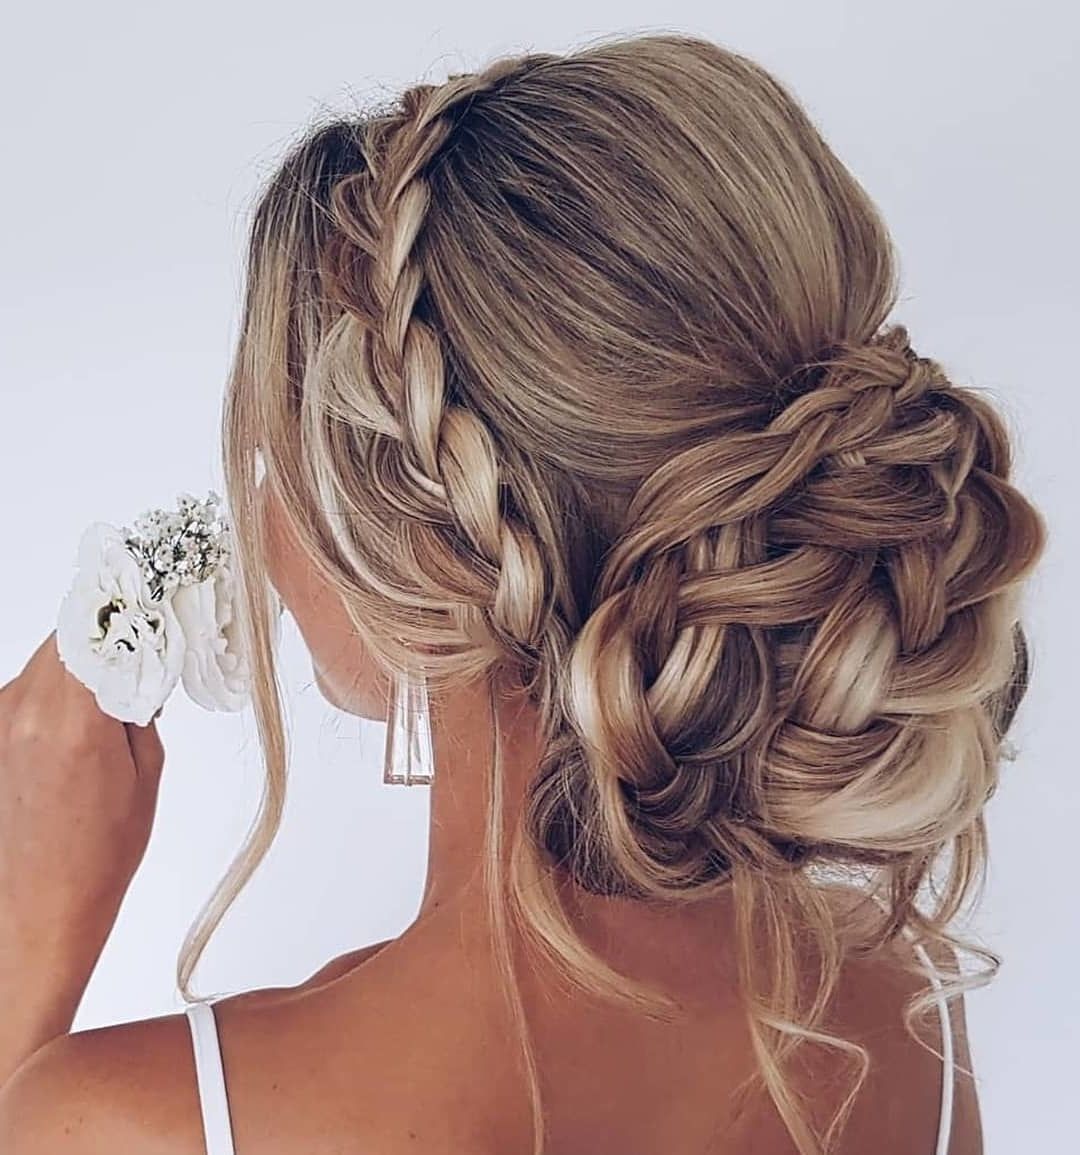 Get the Look: Bridal Braid Updo | Beauty Launchpad